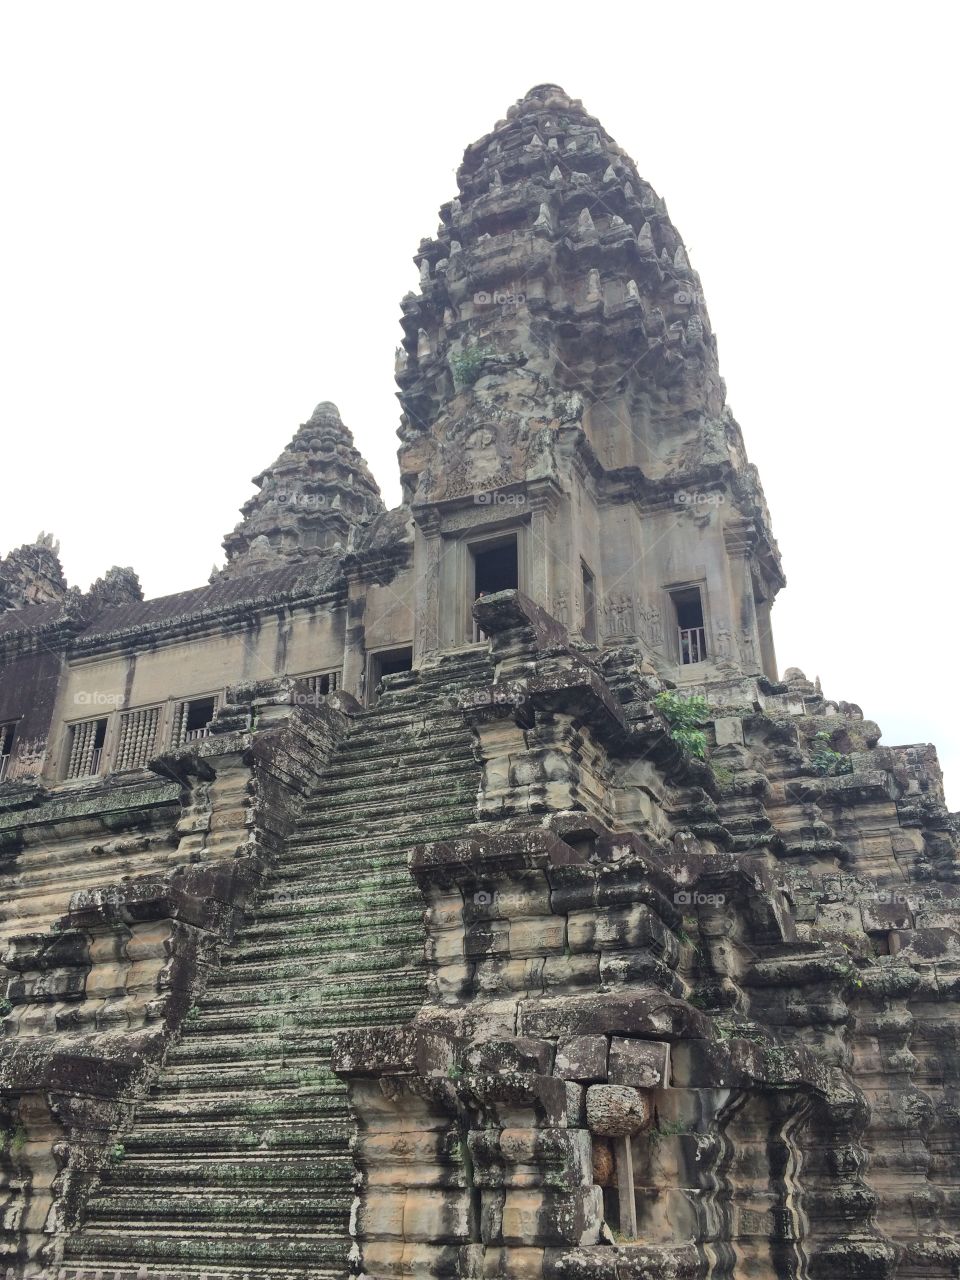 Siem Reap, Cambodia (Angkor Wat temple): stone temple ruins of Eastern Asia culture